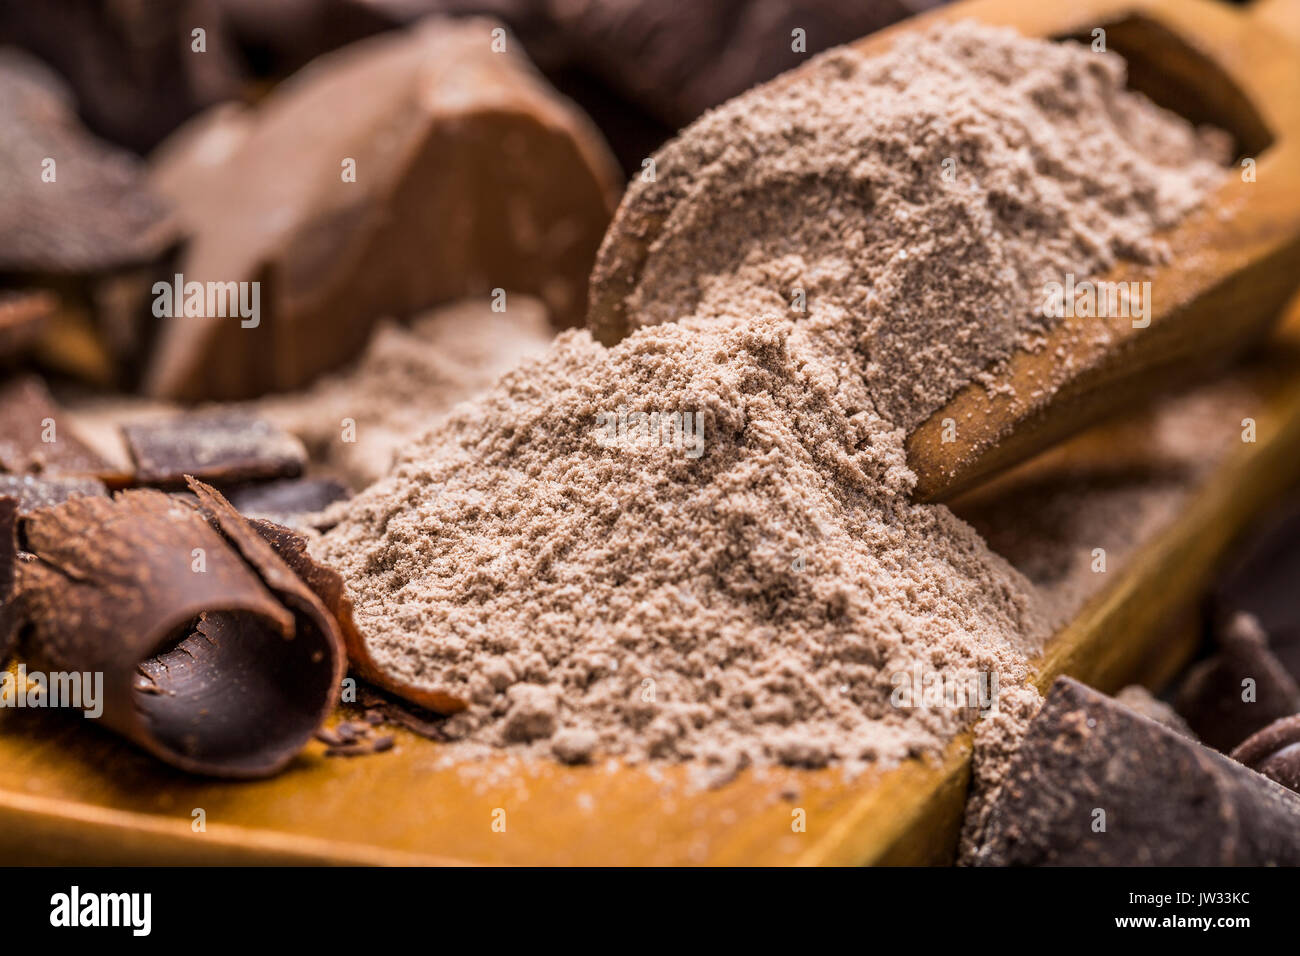 Still life with wooden scoop full with chocolate powder Stock Photo